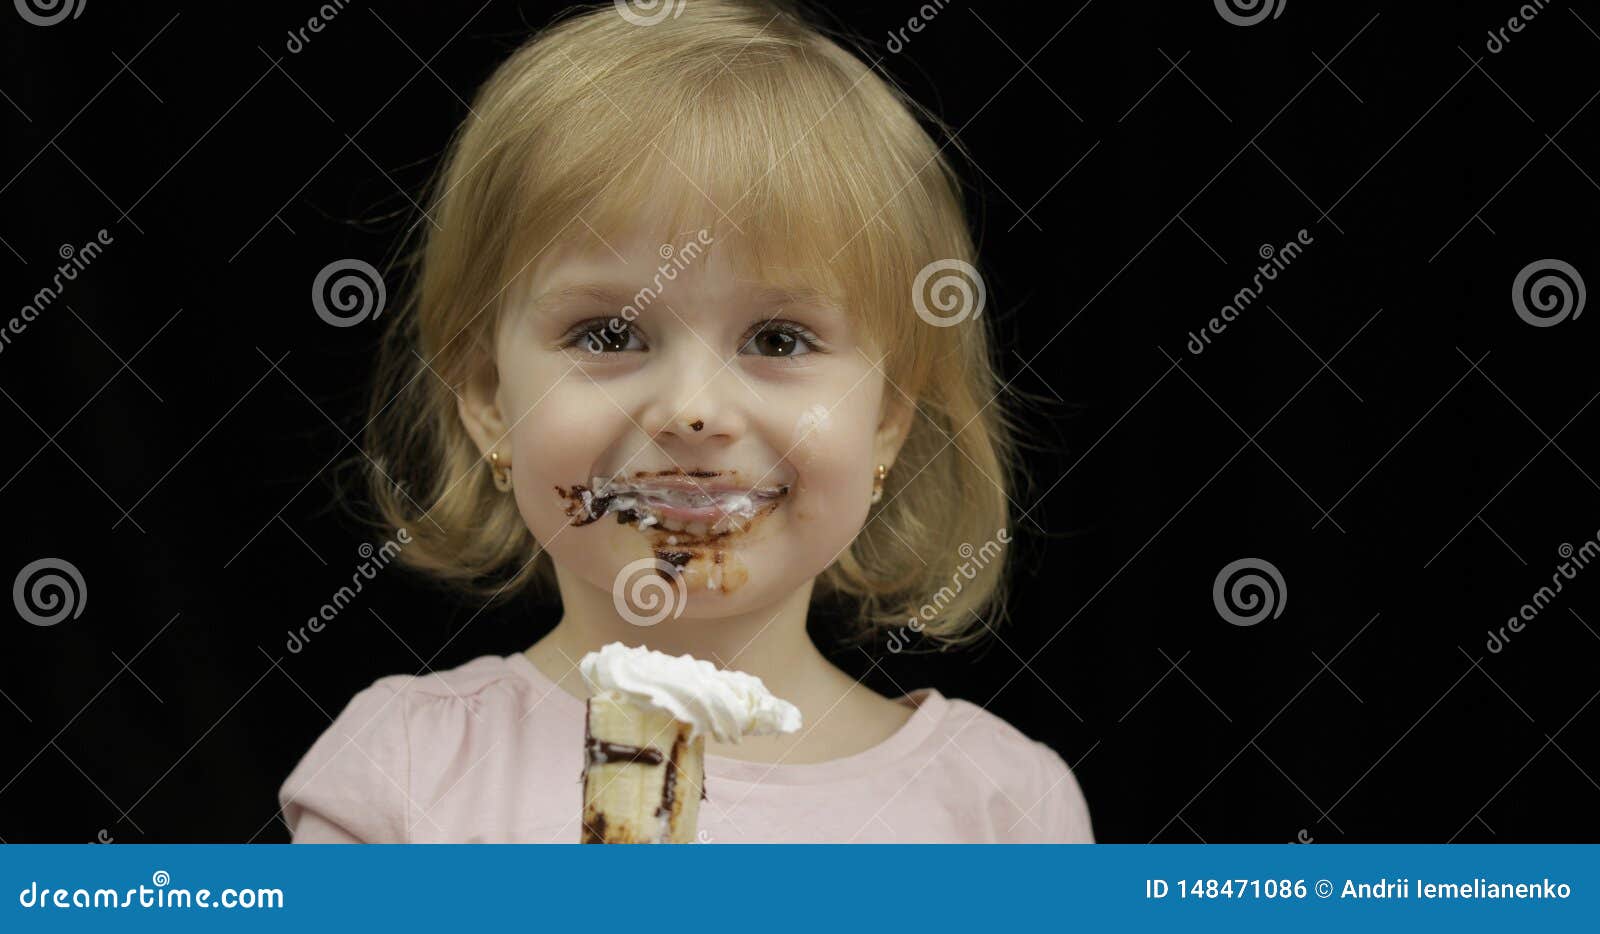 Child With Dirty Face Eats Banana With Melted Chocolate And ...